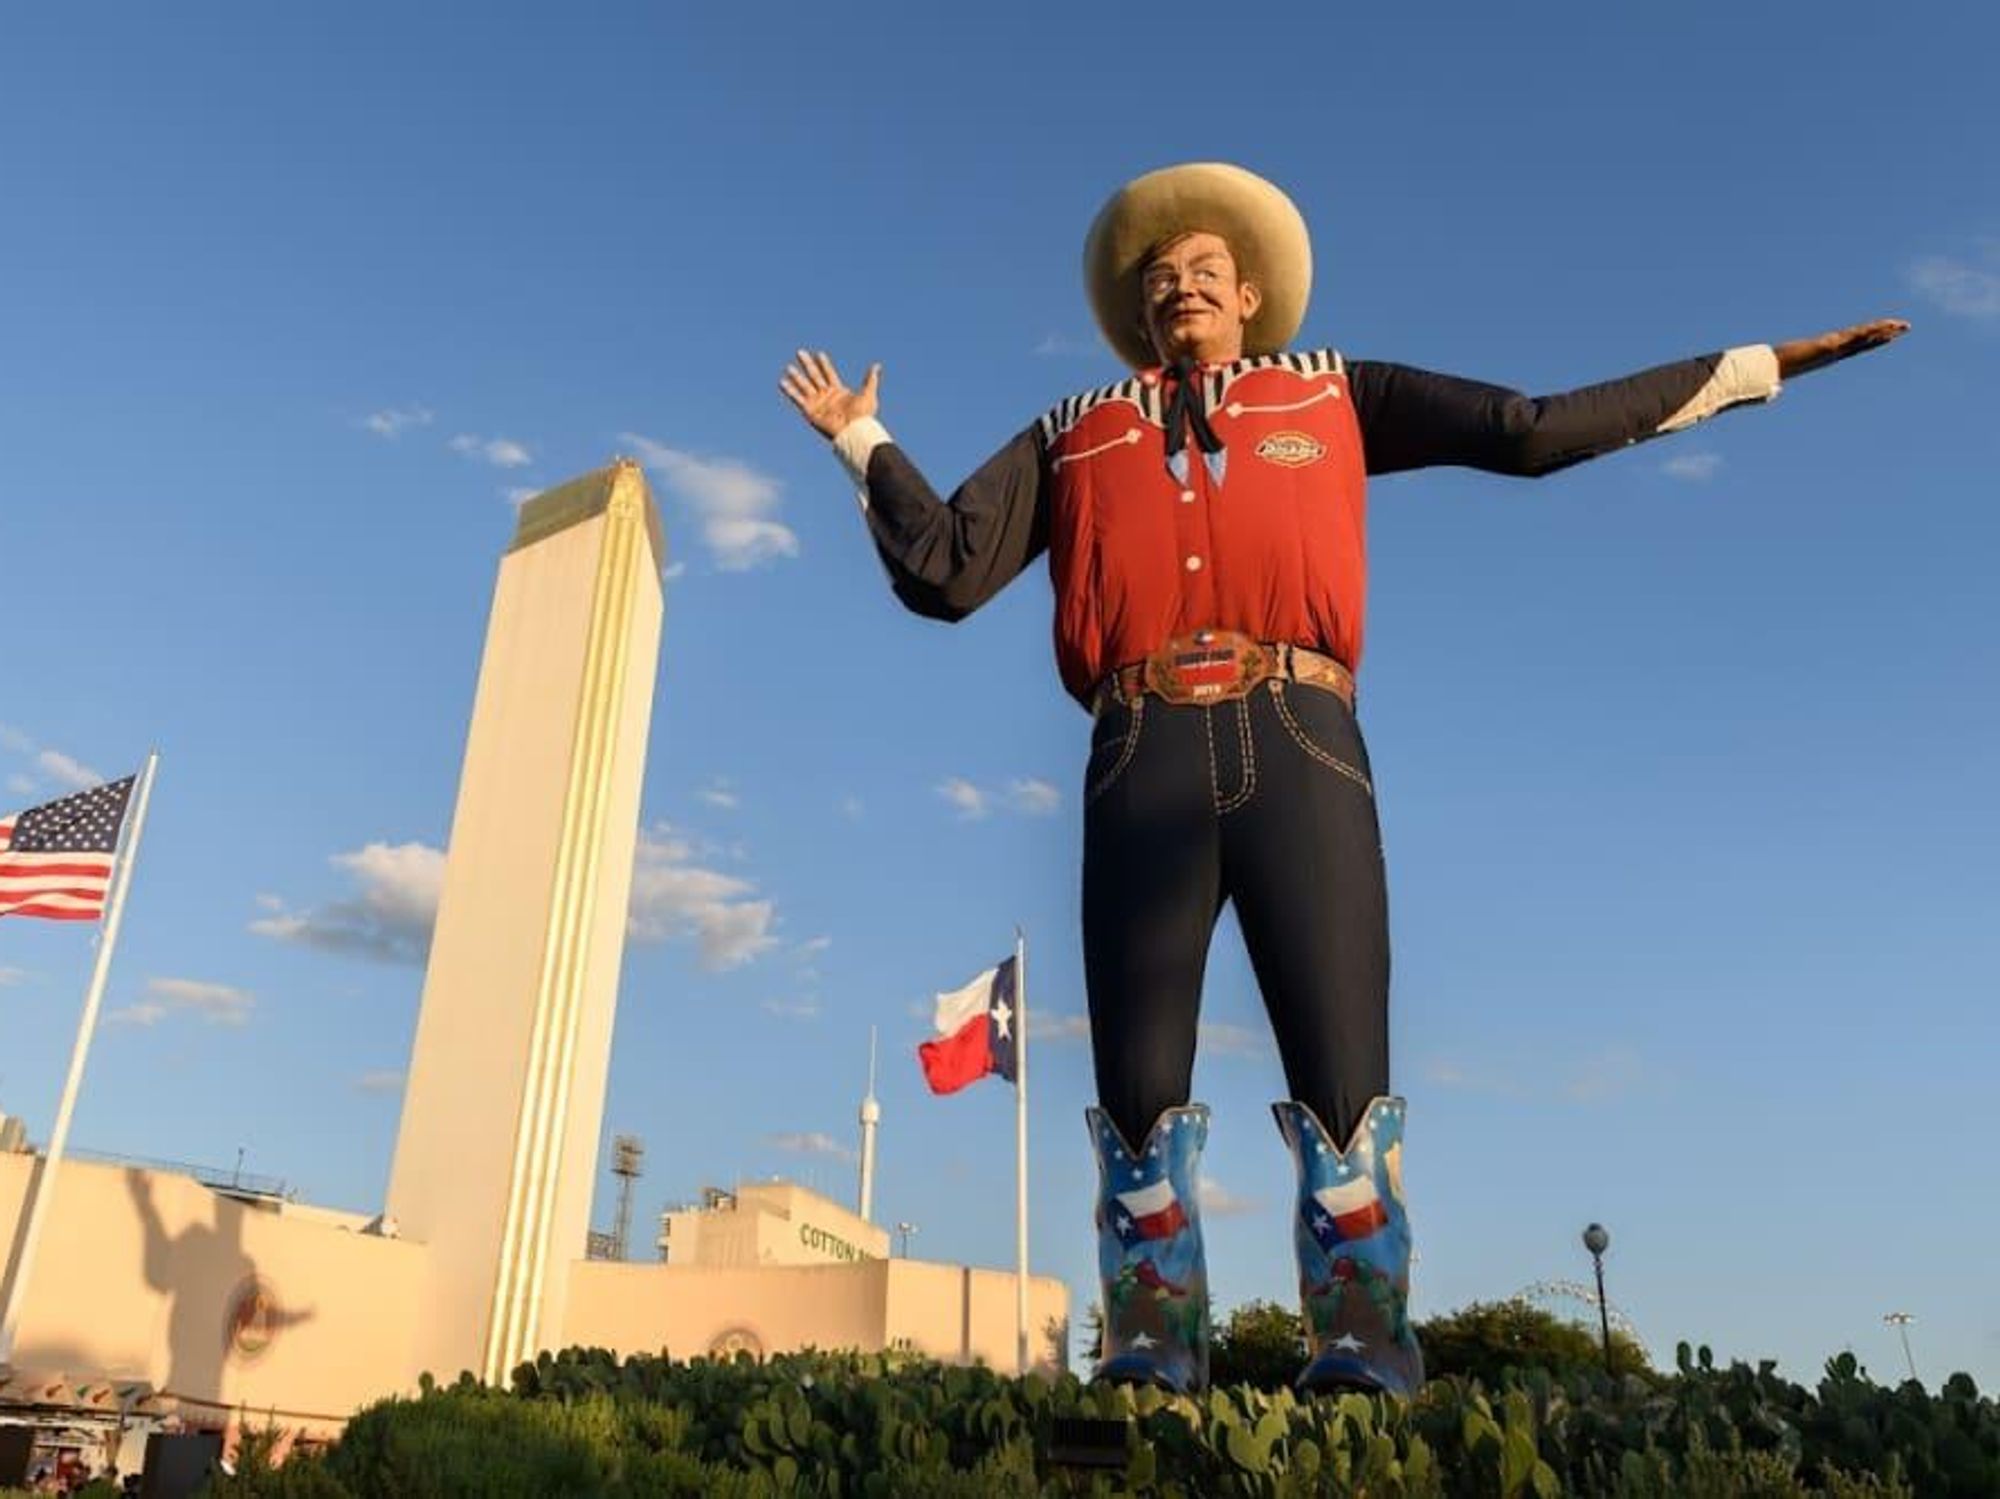 How to get every possible discount at the 2022 State Fair of Texas